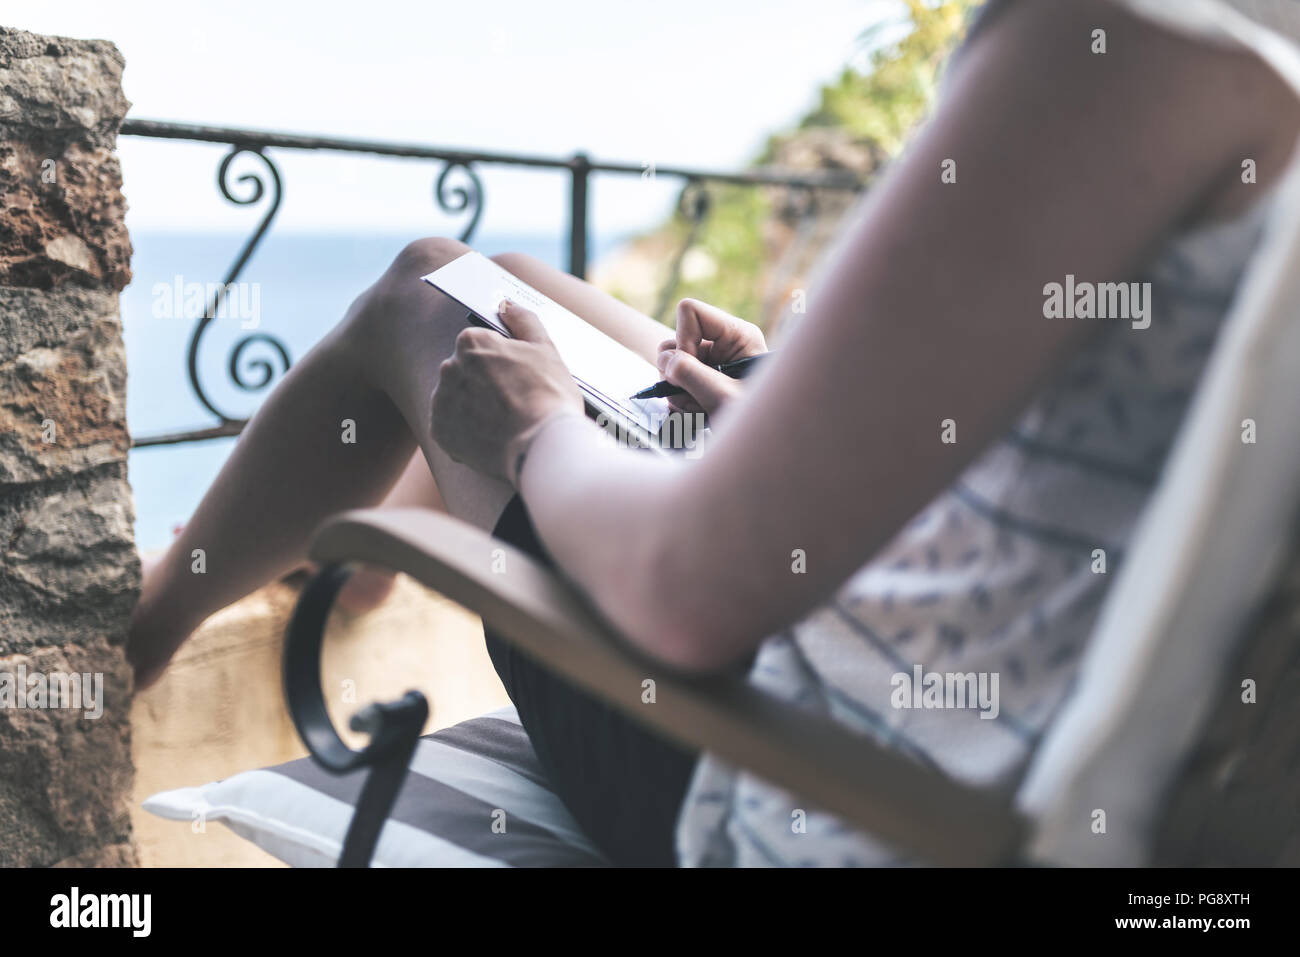 woman on patio by sea writing or taking notes with pen Stock Photo